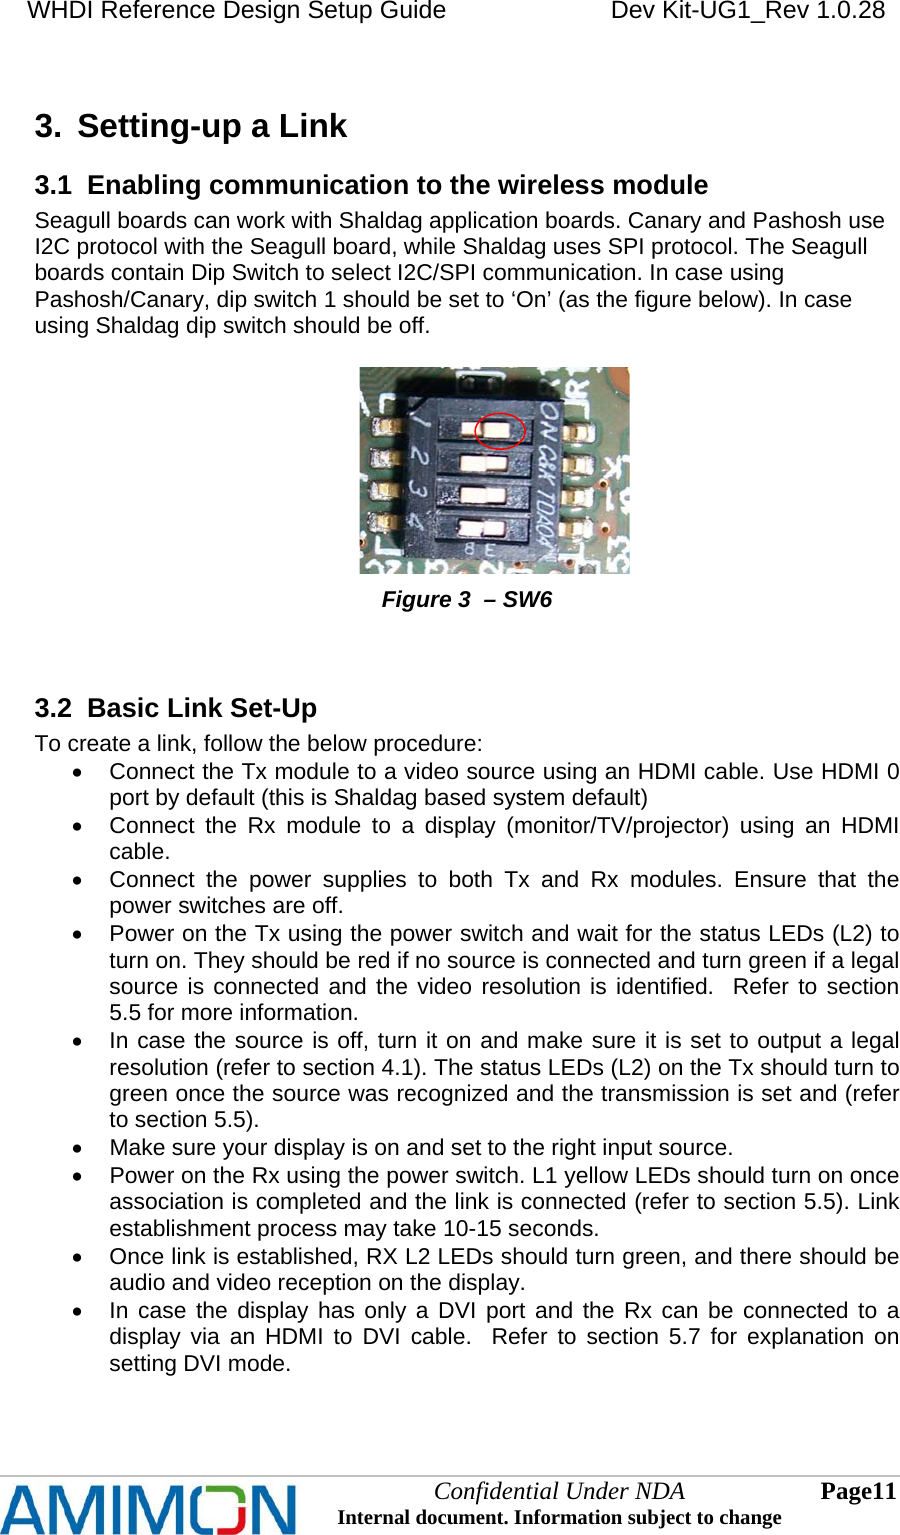 WHDI Reference Design Setup Guide   Dev Kit-UG1_Rev 1.0.28   3.  Setting-up a Link 3.1  Enabling communication to the wireless module Seagull boards can work with Shaldag application boards. Canary and Pashosh use I2C protocol with the Seagull board, while Shaldag uses SPI protocol. The Seagull boards contain Dip Switch to select I2C/SPI communication. In case using Pashosh/Canary, dip switch 1 should be set to ‘On’ (as the figure below). In case using Shaldag dip switch should be off.                                                         Figure 3  – SW6   3.2  Basic Link Set-Up To create a link, follow the below procedure:   Connect the Tx module to a video source using an HDMI cable. Use HDMI 0 port by default (this is Shaldag based system default)   Connect the Rx module to a display (monitor/TV/projector) using an HDMI cable.   Connect the power supplies to both Tx and Rx modules. Ensure that the power switches are off.   Power on the Tx using the power switch and wait for the status LEDs (L2) to turn on. They should be red if no source is connected and turn green if a legal source is connected and the video resolution is identified.  Refer to section 5.5 for more information.   In case the source is off, turn it on and make sure it is set to output a legal resolution (refer to section 4.1). The status LEDs (L2) on the Tx should turn to green once the source was recognized and the transmission is set and (refer to section 5.5).   Make sure your display is on and set to the right input source.   Power on the Rx using the power switch. L1 yellow LEDs should turn on once association is completed and the link is connected (refer to section 5.5). Link establishment process may take 10-15 seconds.   Once link is established, RX L2 LEDs should turn green, and there should be audio and video reception on the display.   In case the display has only a DVI port and the Rx can be connected to a display via an HDMI to DVI cable.  Refer to section 5.7 for explanation on setting DVI mode.  Confidential Under NDA Internal document. Information subject to change  11 Page   